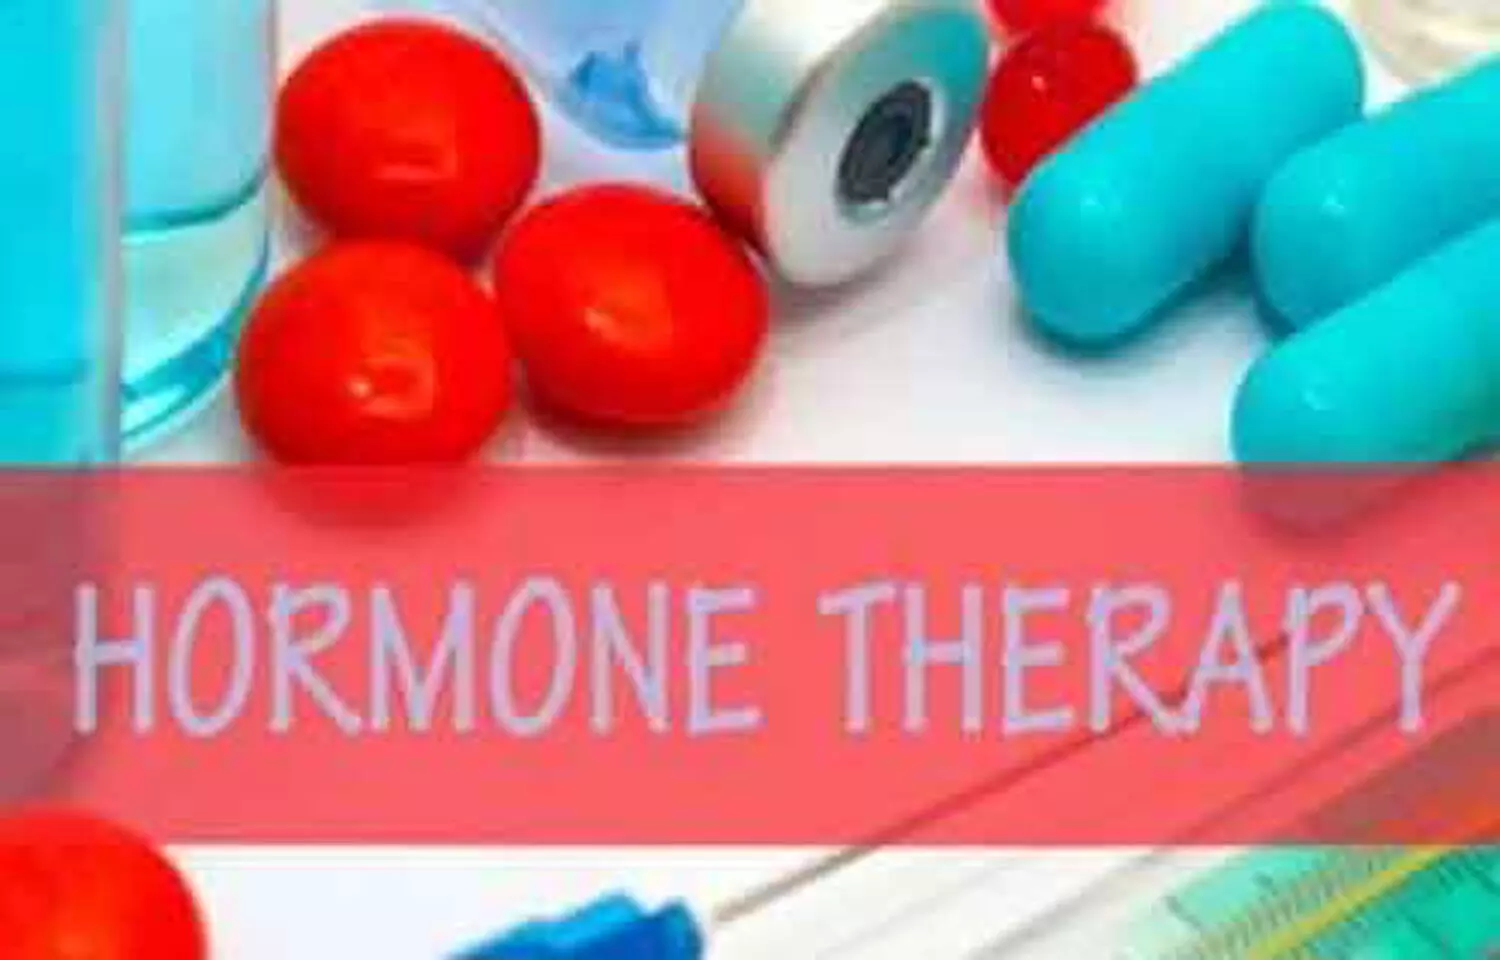 How hormone therapy slows progression of atherosclerosis, reveals study